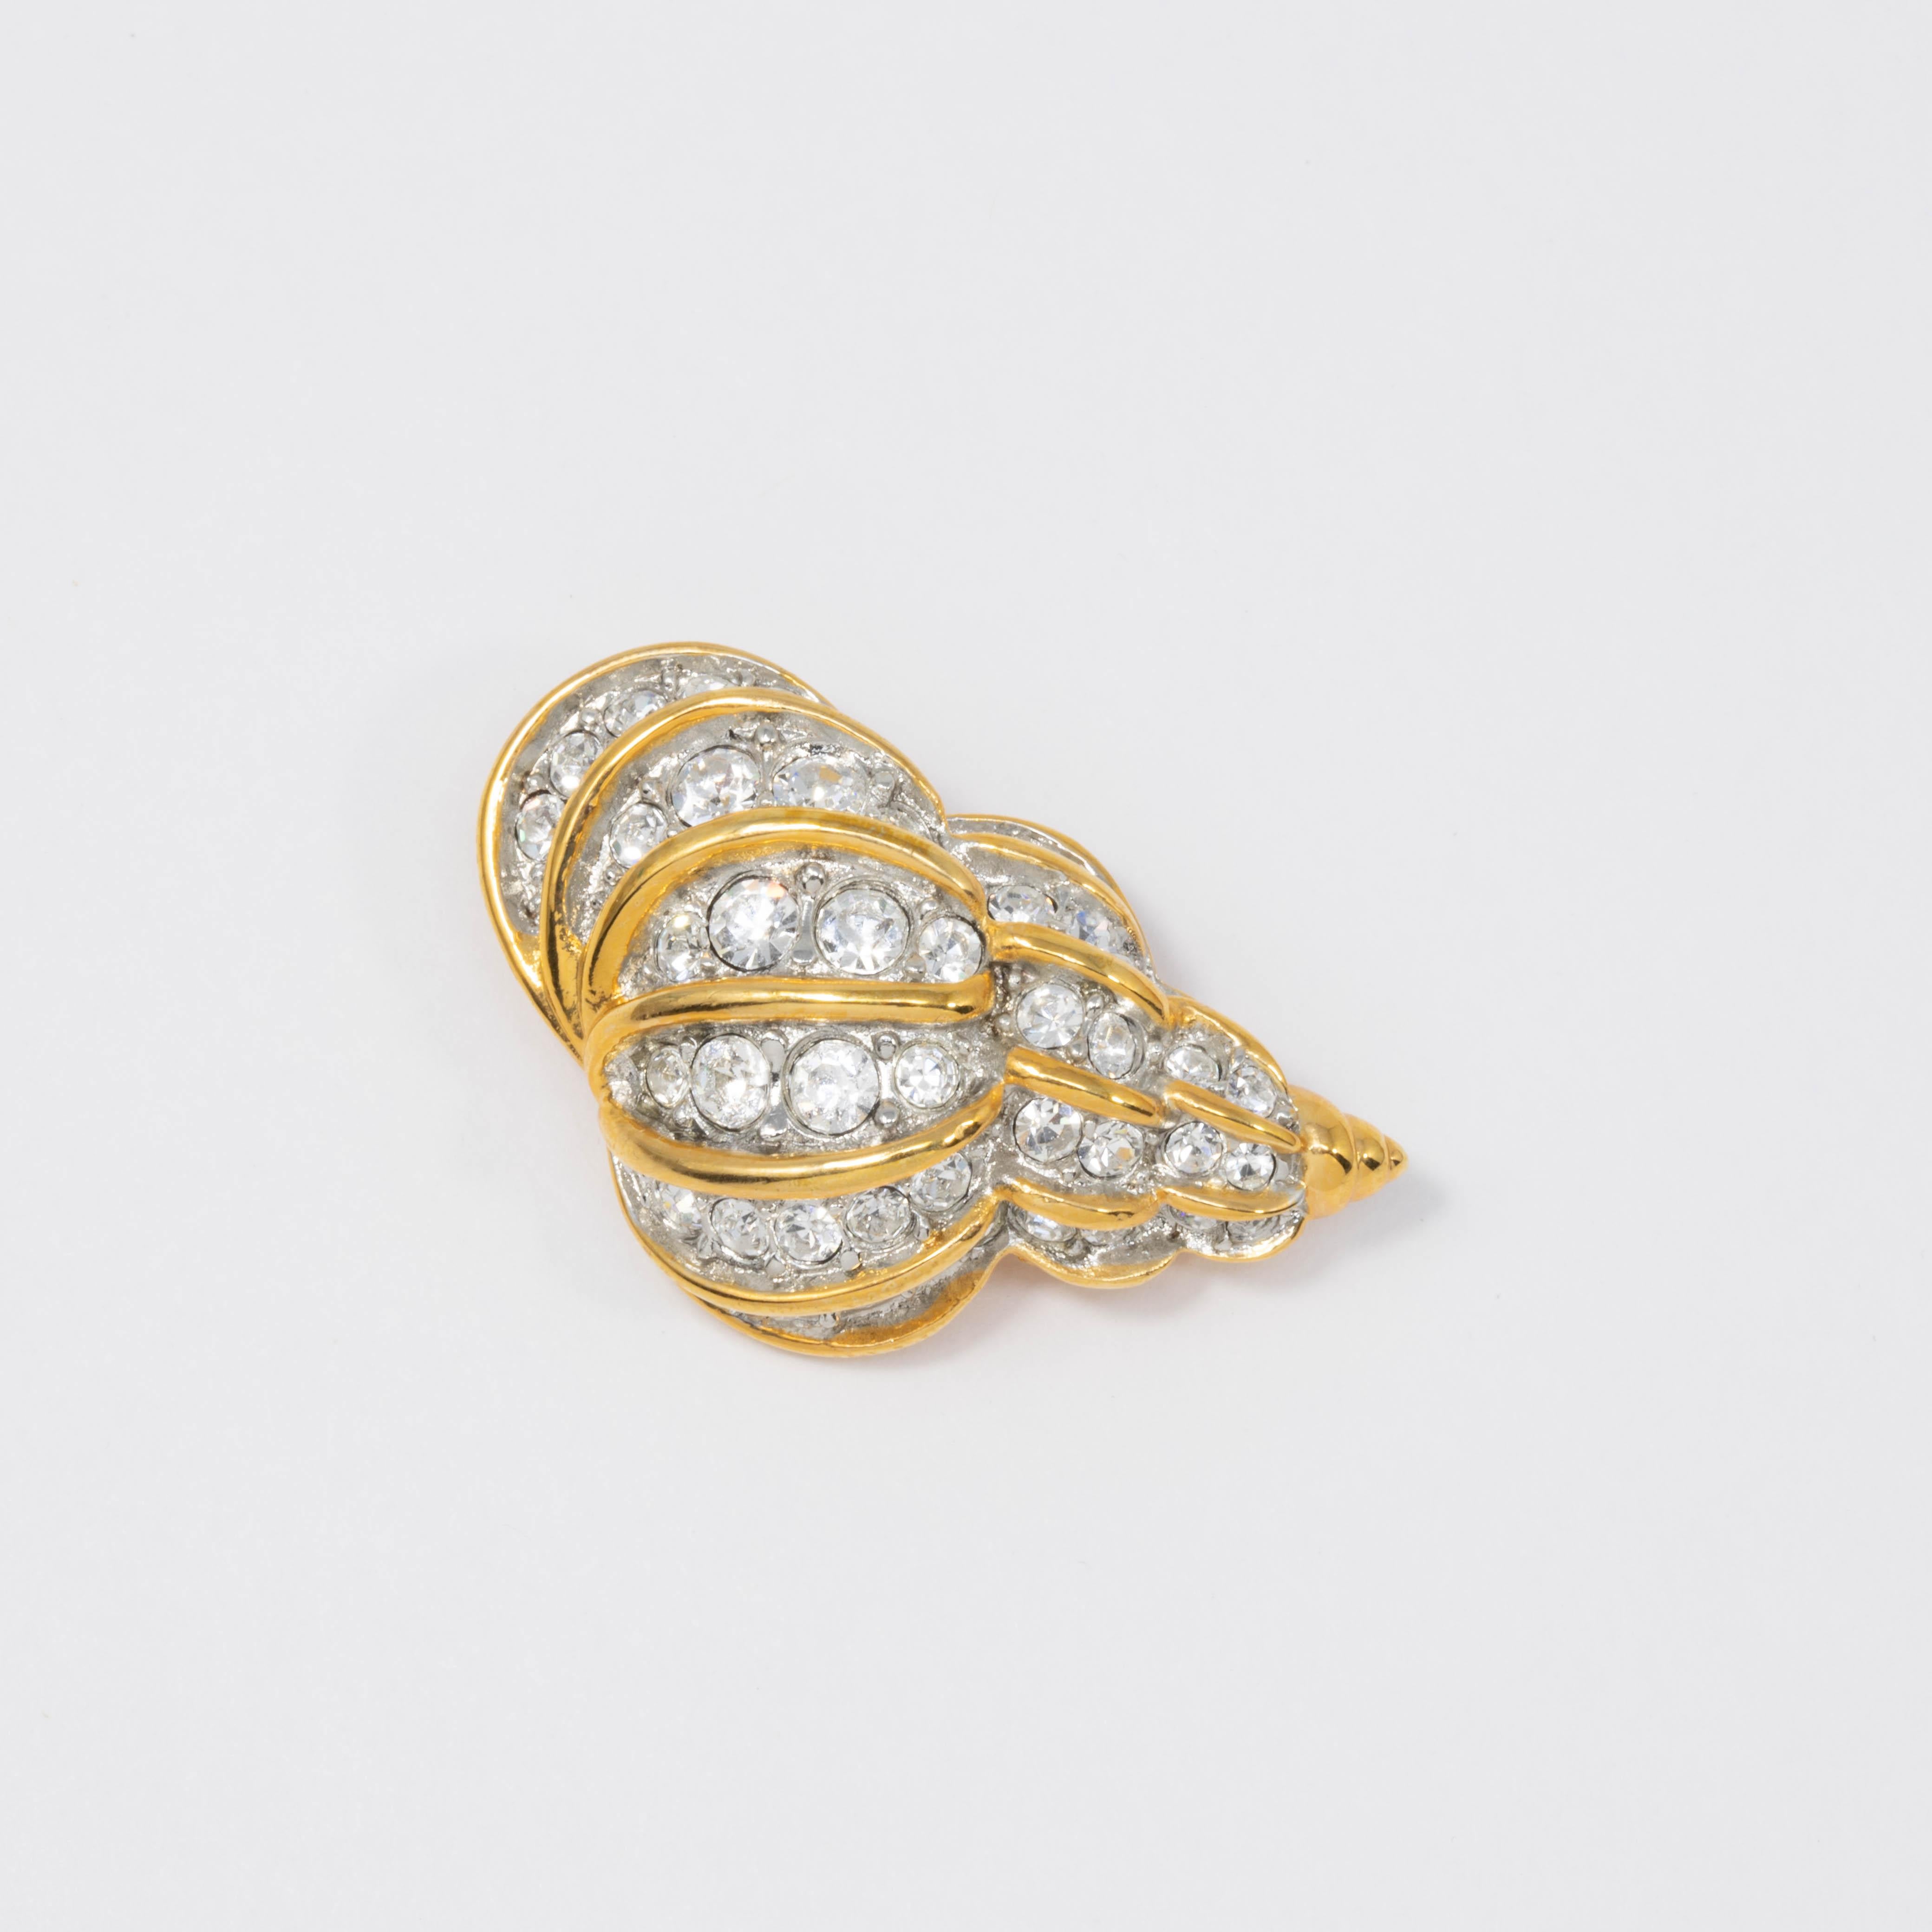 More beautiful than the oceans! A golden conch pin brooch by Kenneth Jay Lane covered with sparkling clear pave crystals.

Gold plated.

Tags, Marks, Hallmarks: KJL, Made in USA